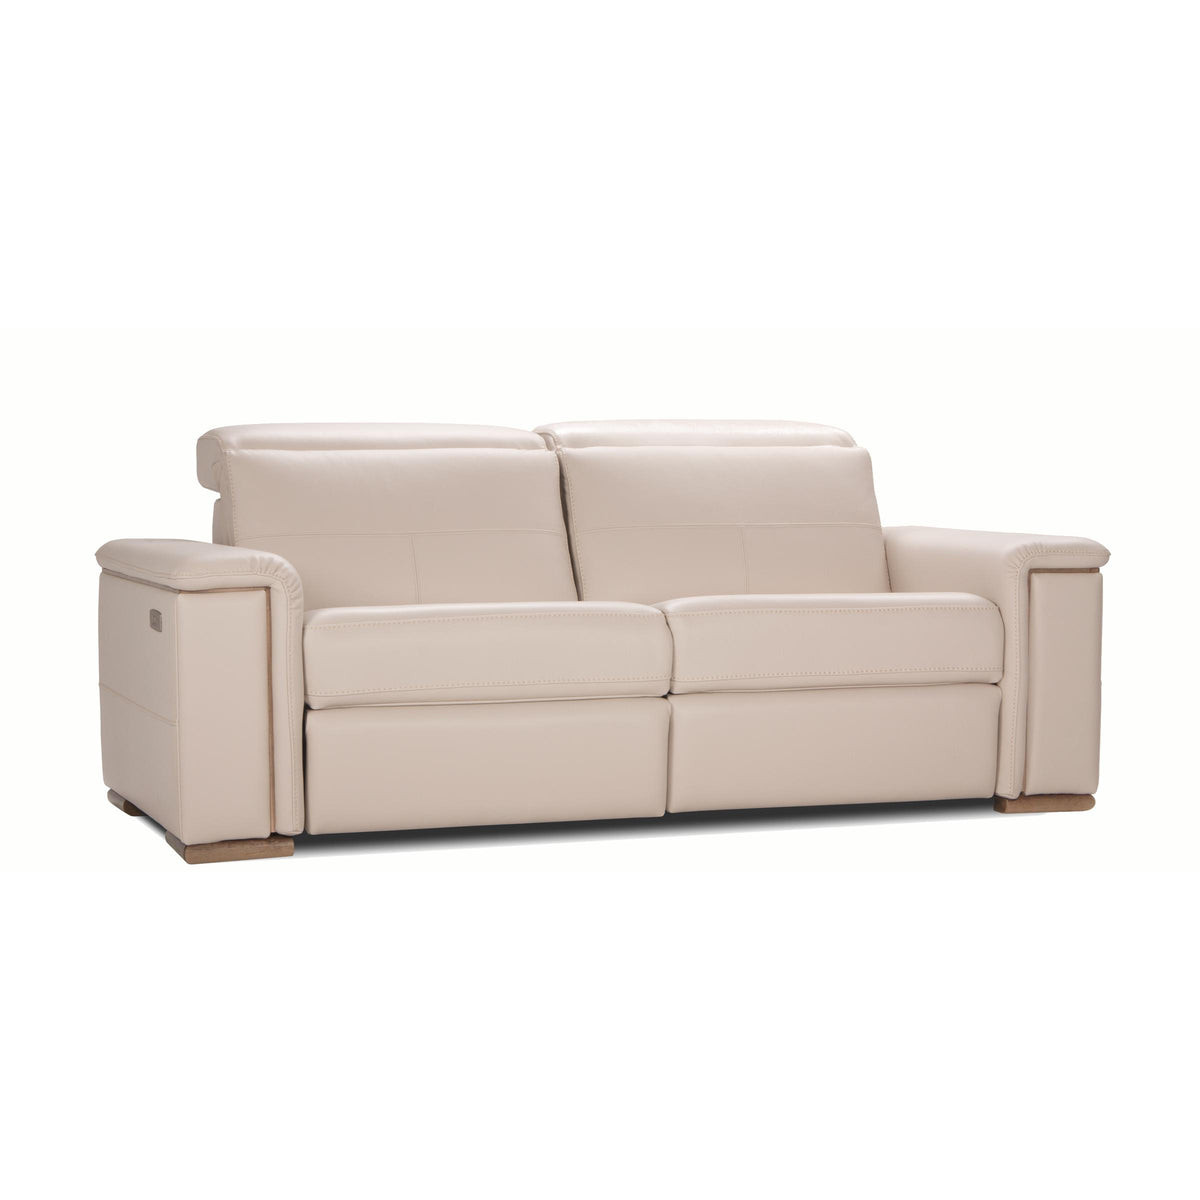 Melbourne Power Reclining Leather Sofa IMAGE 1